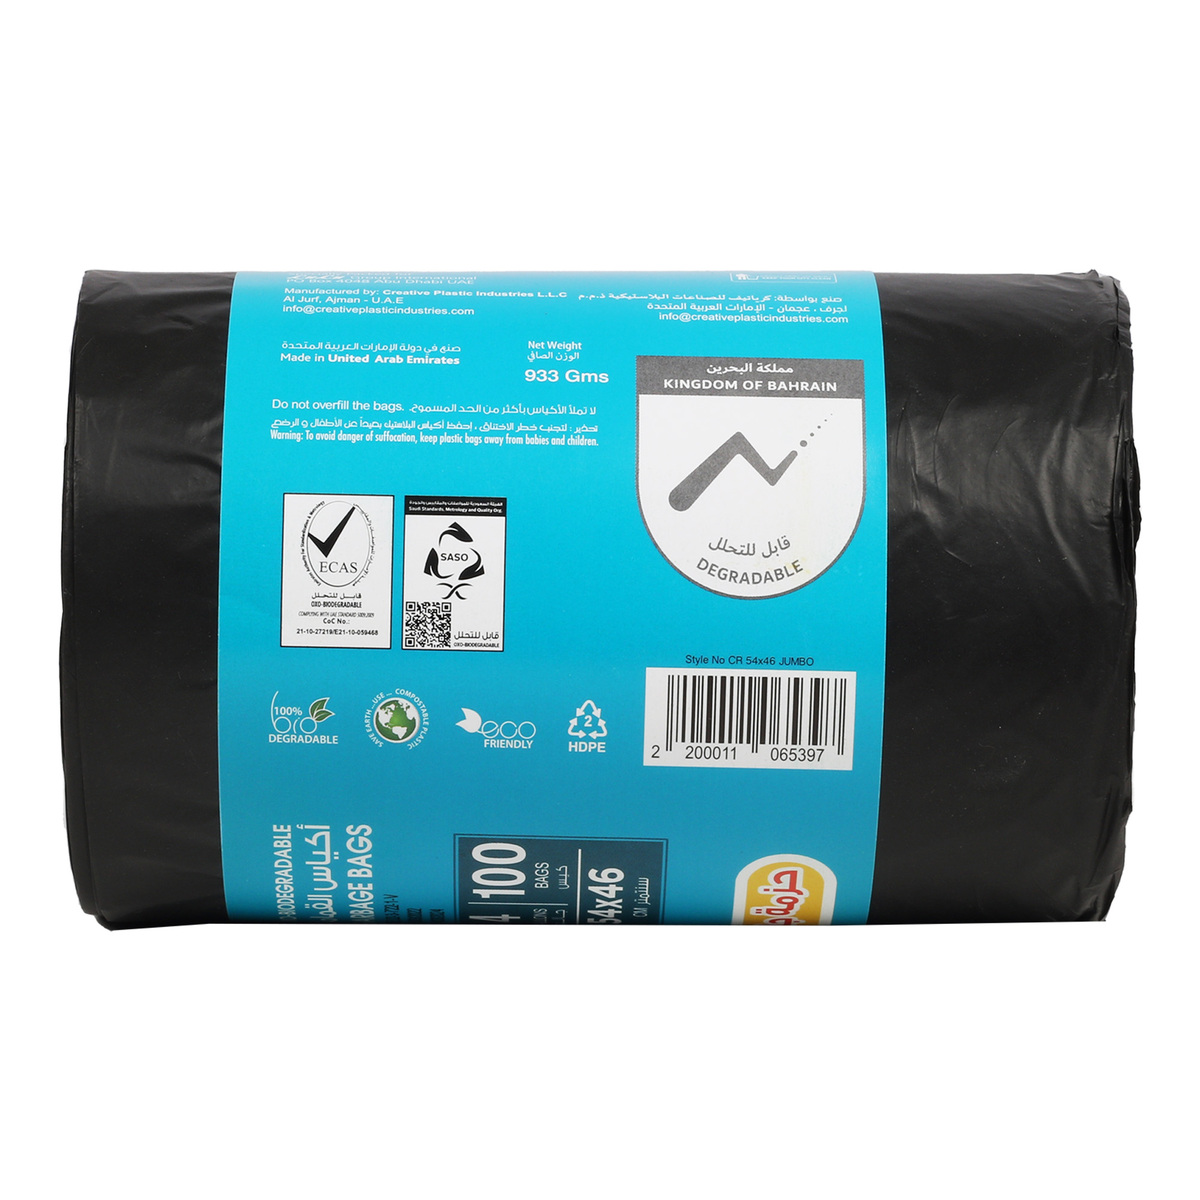 Home Mate Biodegradable Black Garbage Roll Jumbo Pack, 4 Gallons Size, 54 x 46cm, 100 pcs